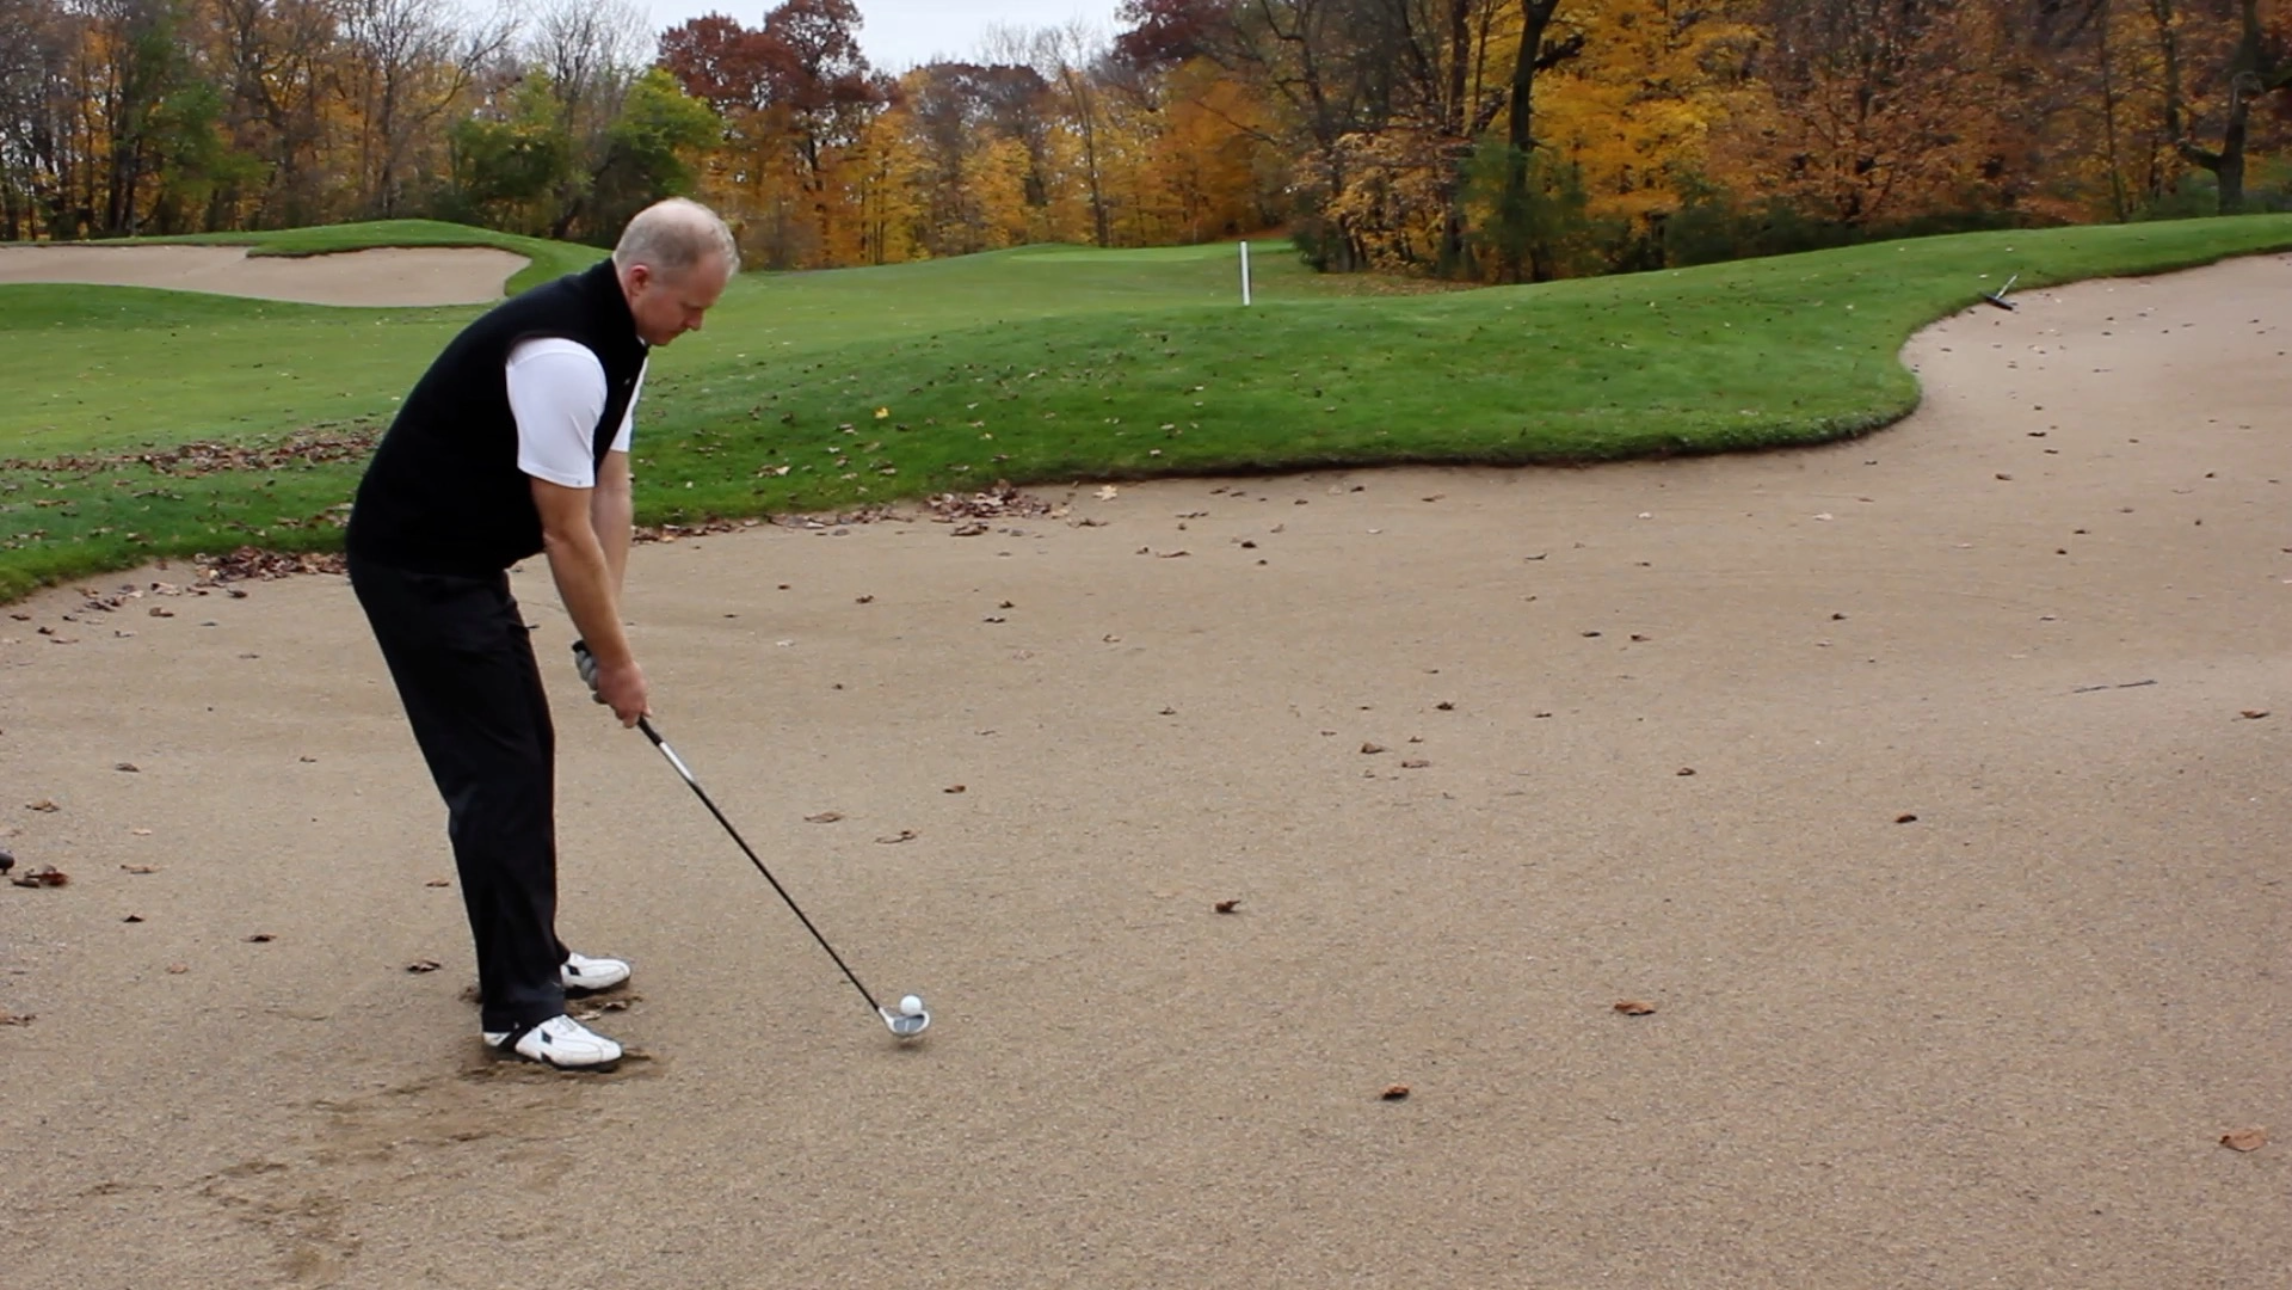 A golfer hits a ball from a sand bunker